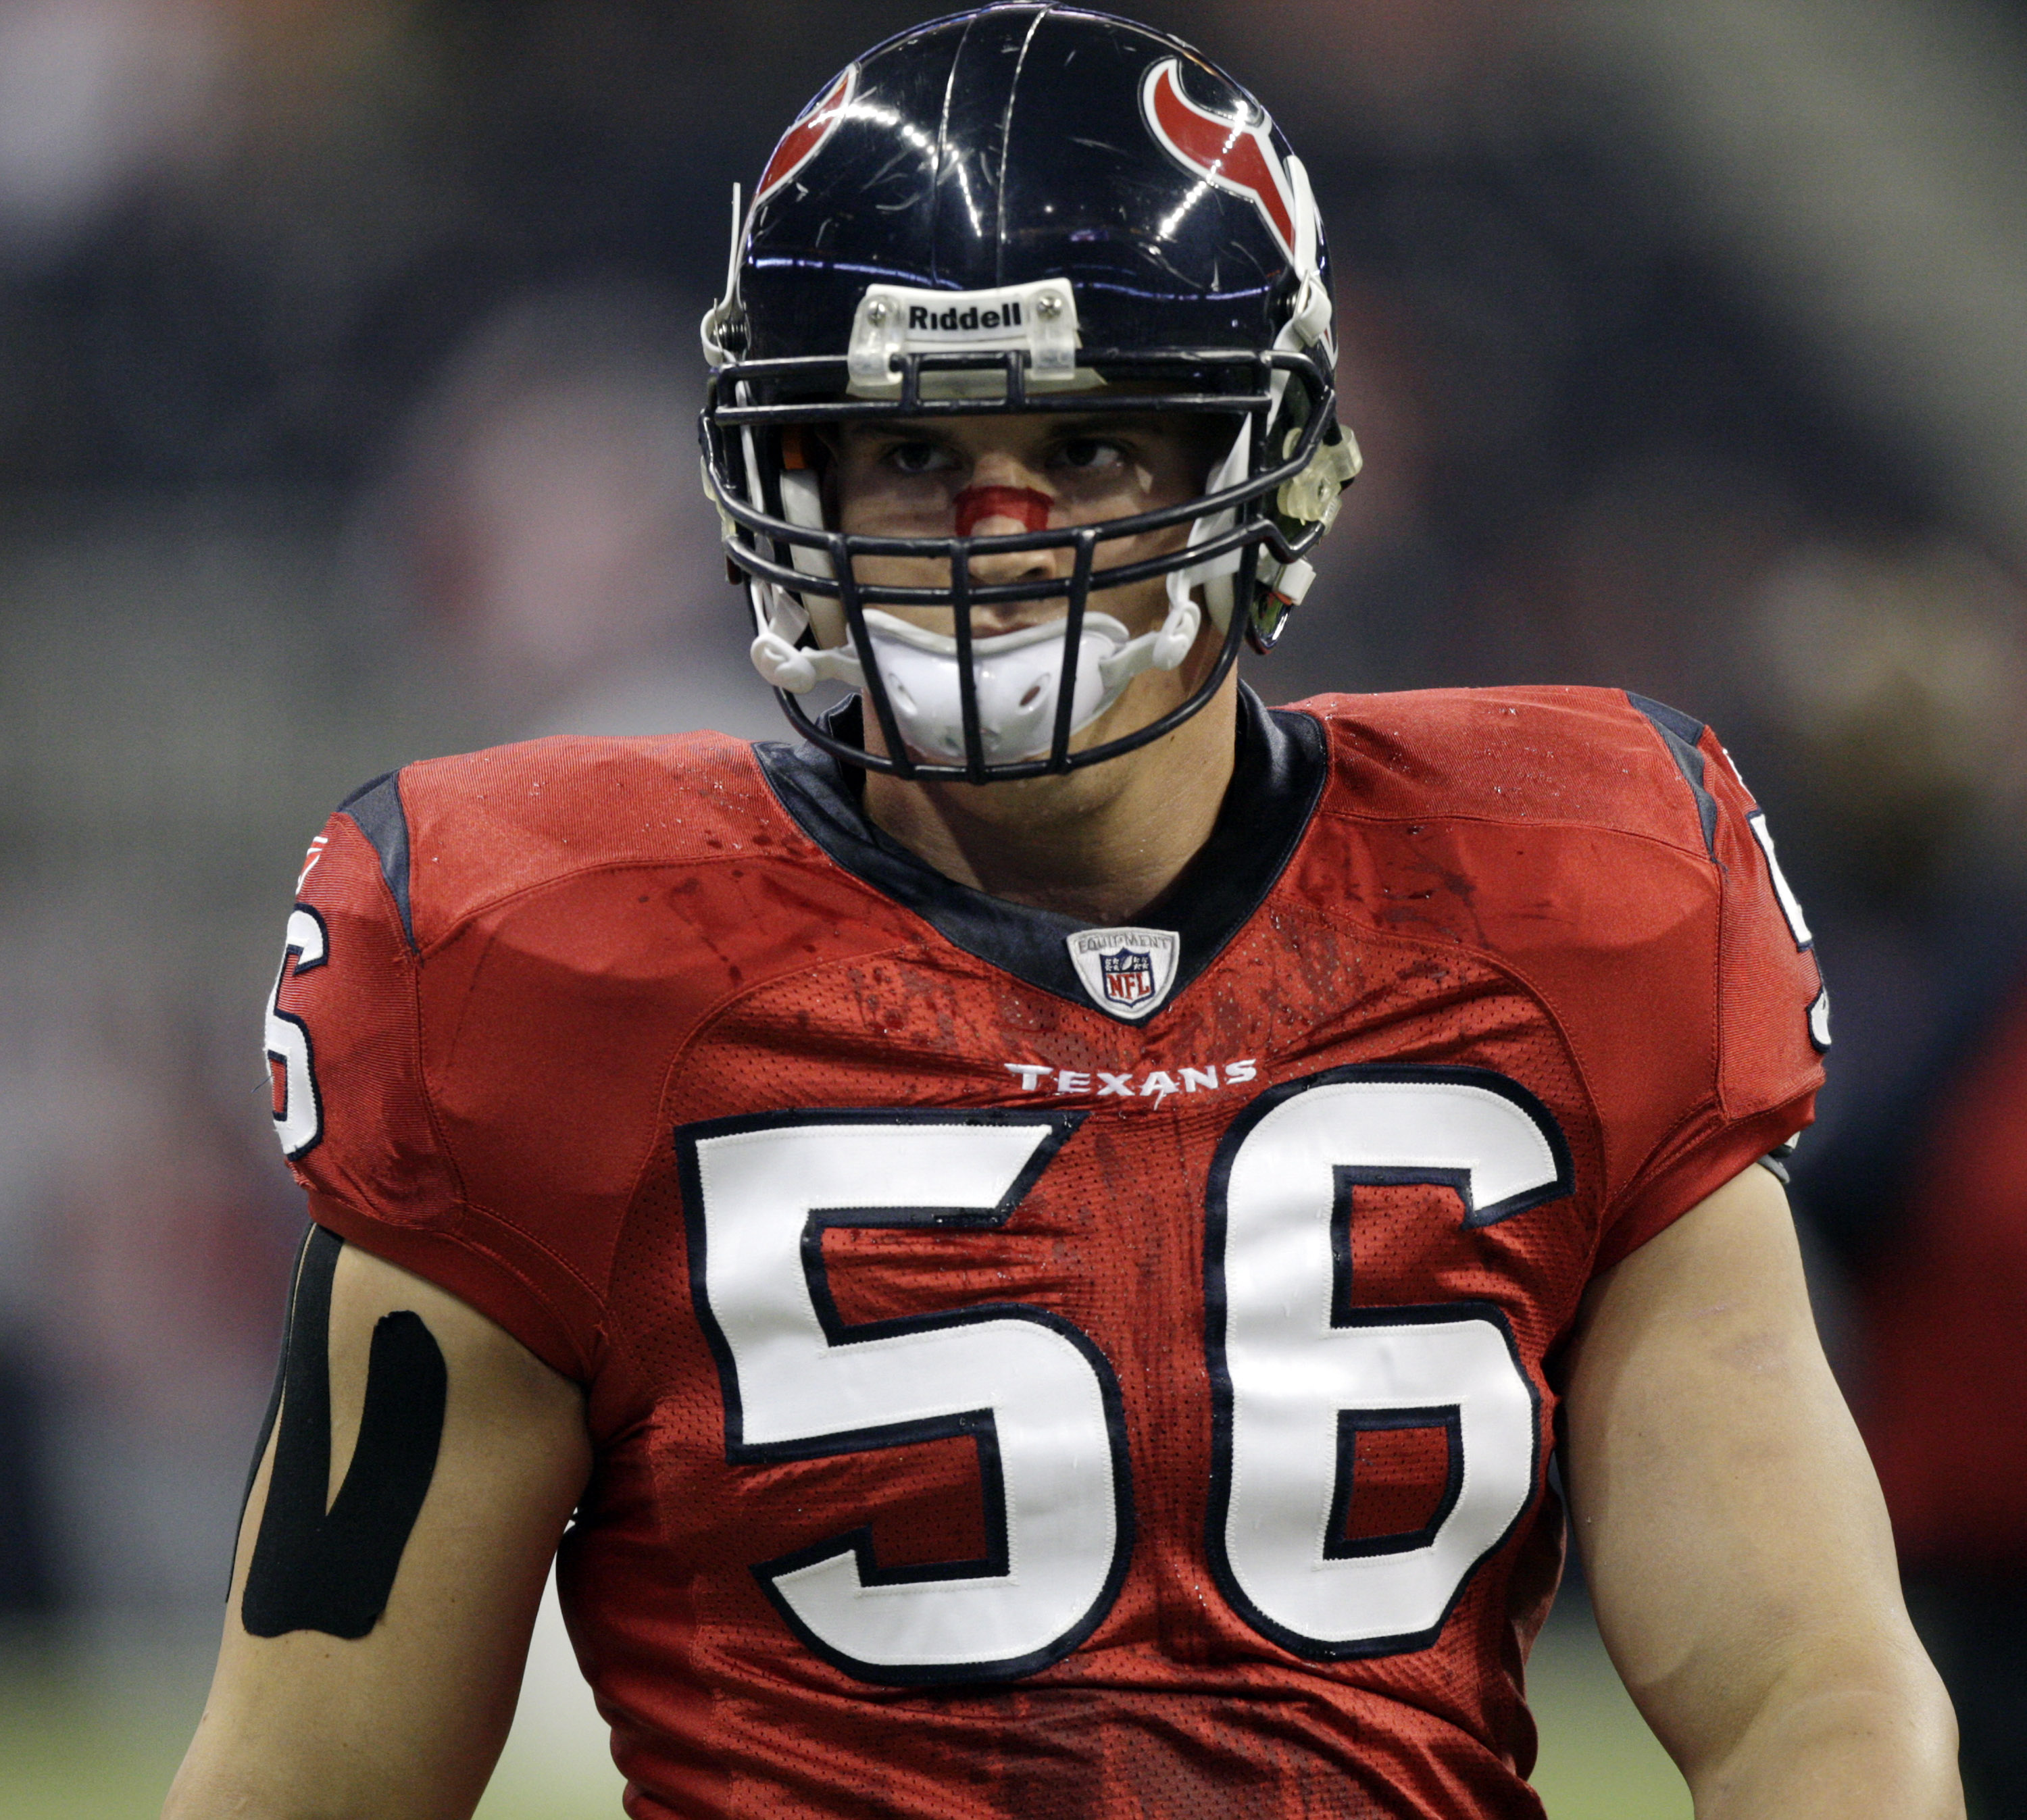 HOUSTON, TX - DECEMBER 13:  Linebacker Brian Cushing #56 of the Houston Texans during warm ups before playing the Baltimore Ravens at Reliant Stadium on December 13, 2010 in Houston, Texas.  (Photo by Bob Levey/Getty Images)